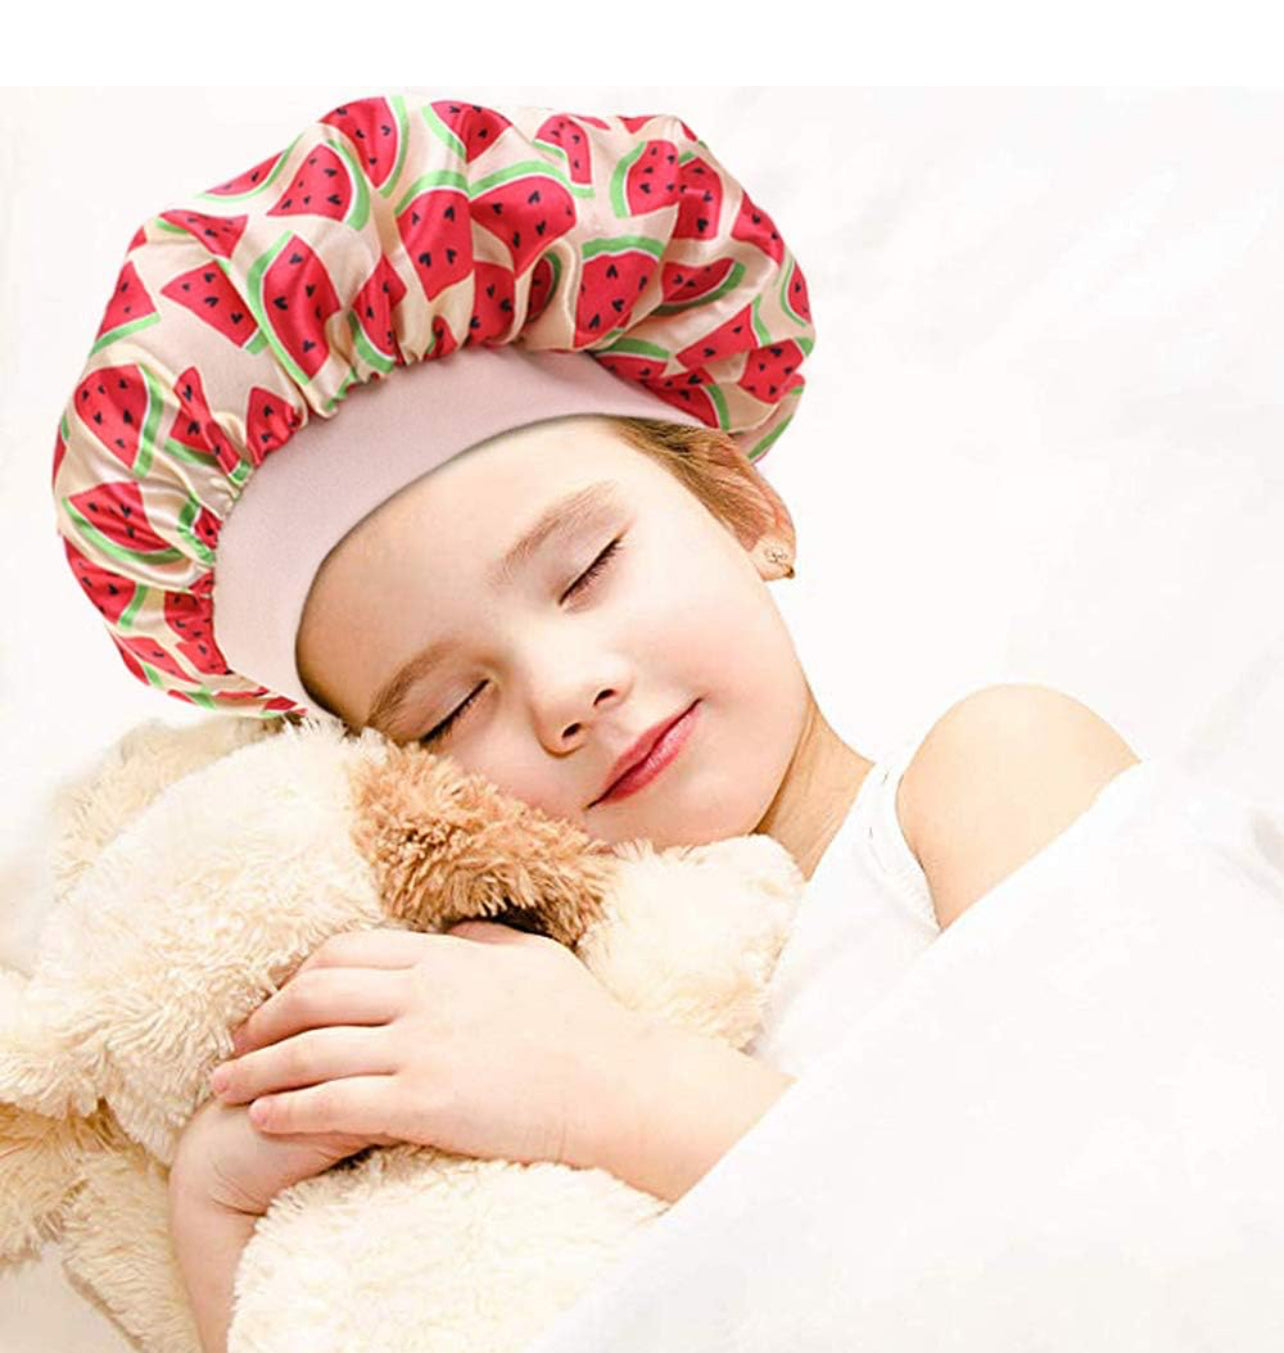 3 Pieces Kids Satin Bonnet Sleeping Cap Soft Silk Wide Band Night Hats for Natural Hair Teens Toddler Child Baby